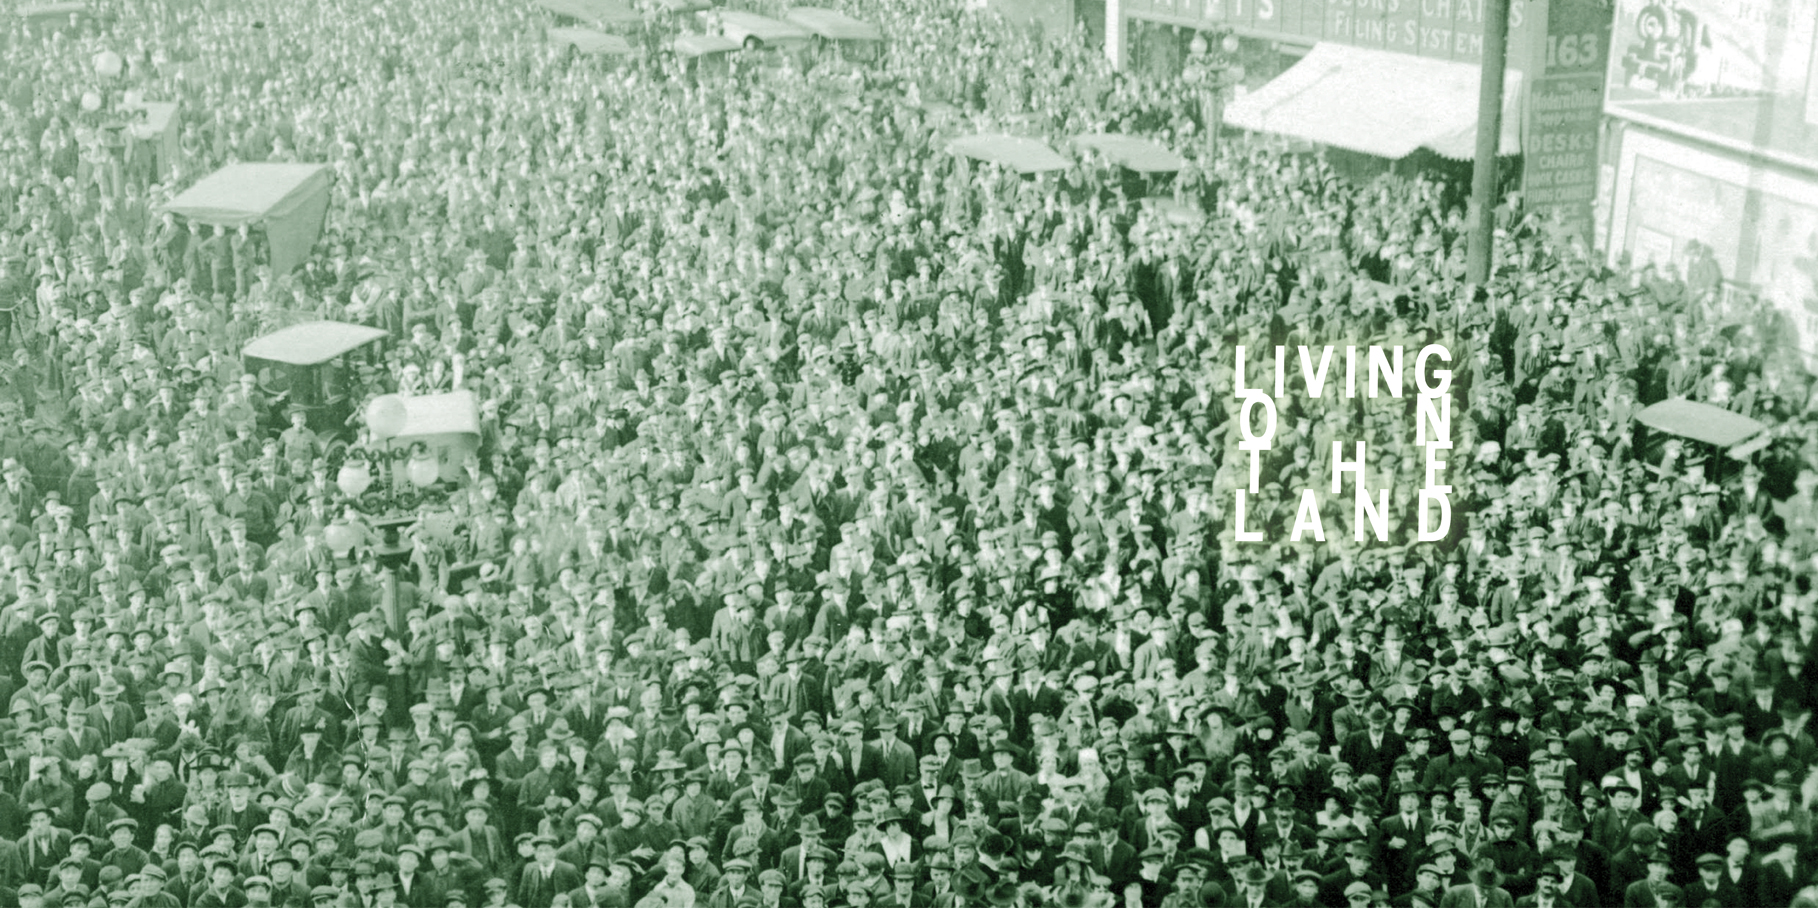 background image - old photo (early 1900's) of a large crowd looking up